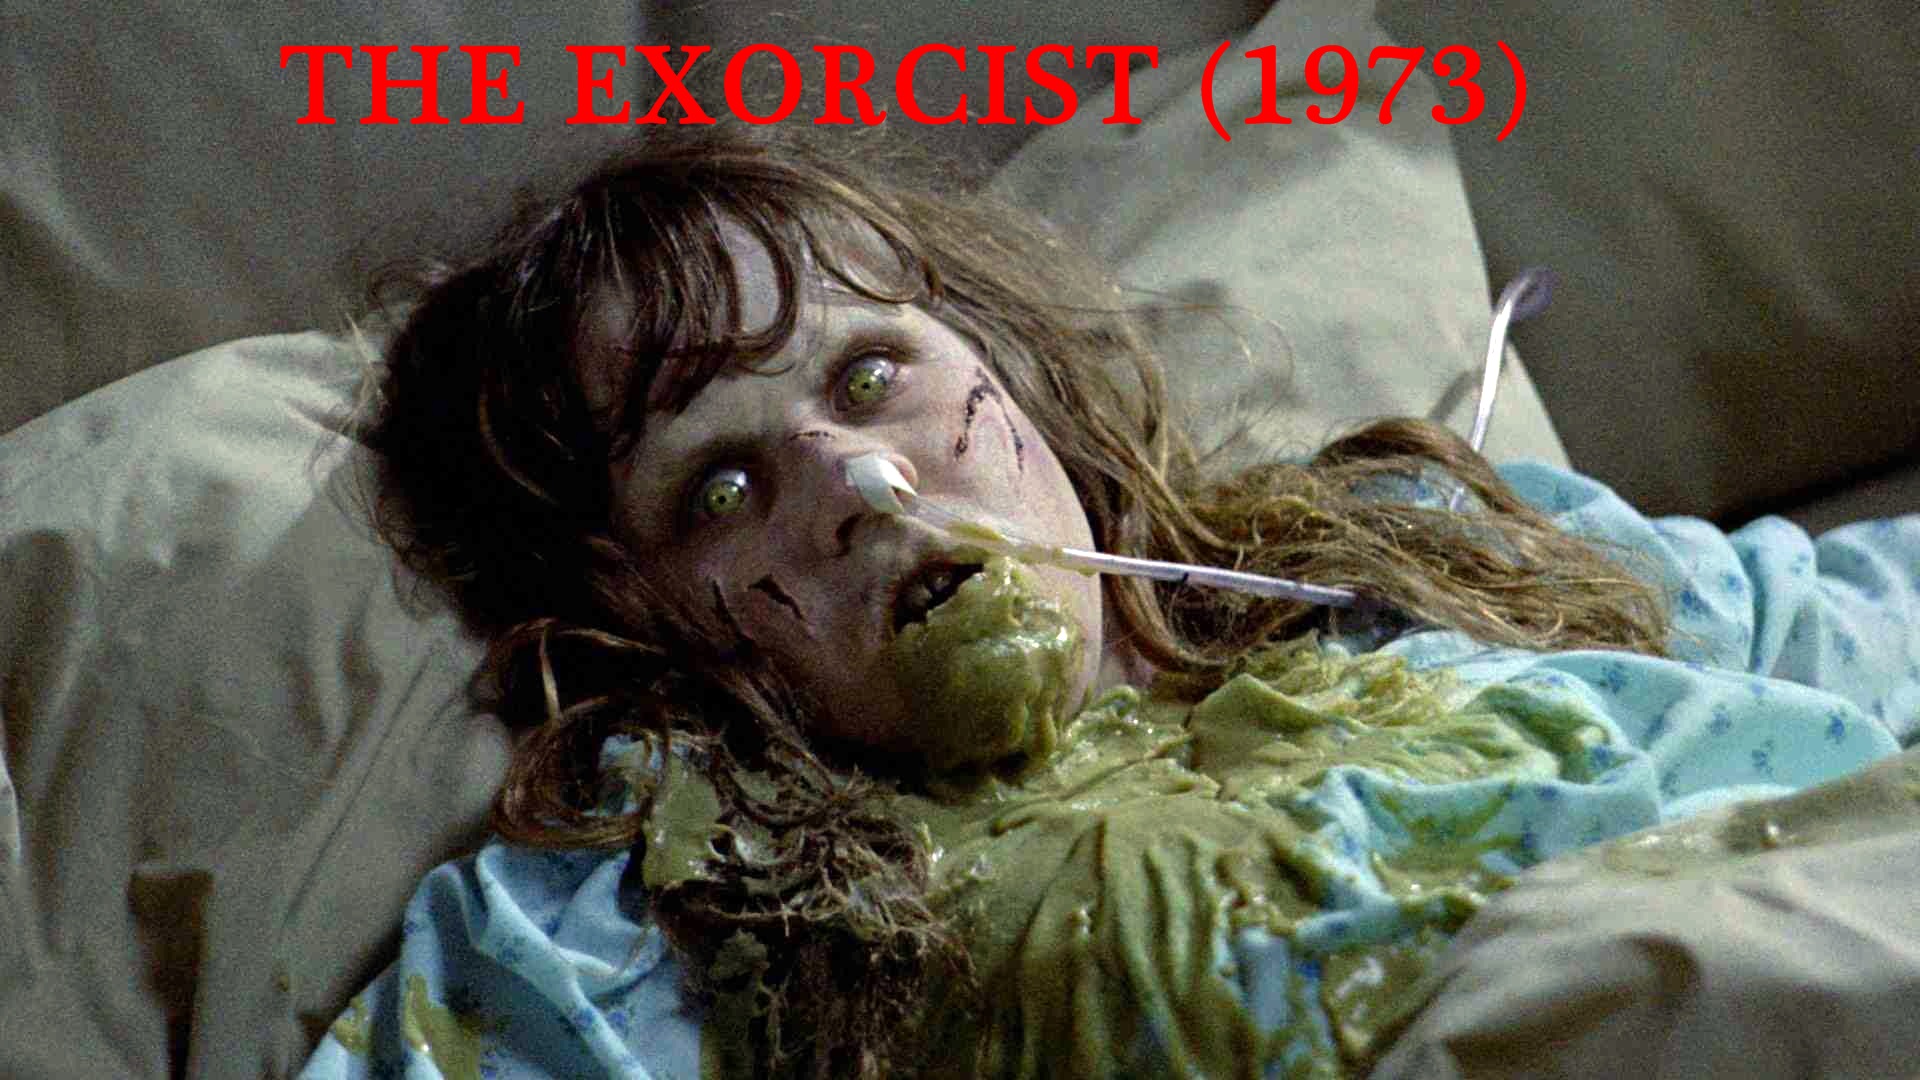 THE EXORCIST (1973) William Friedkin, filming locations